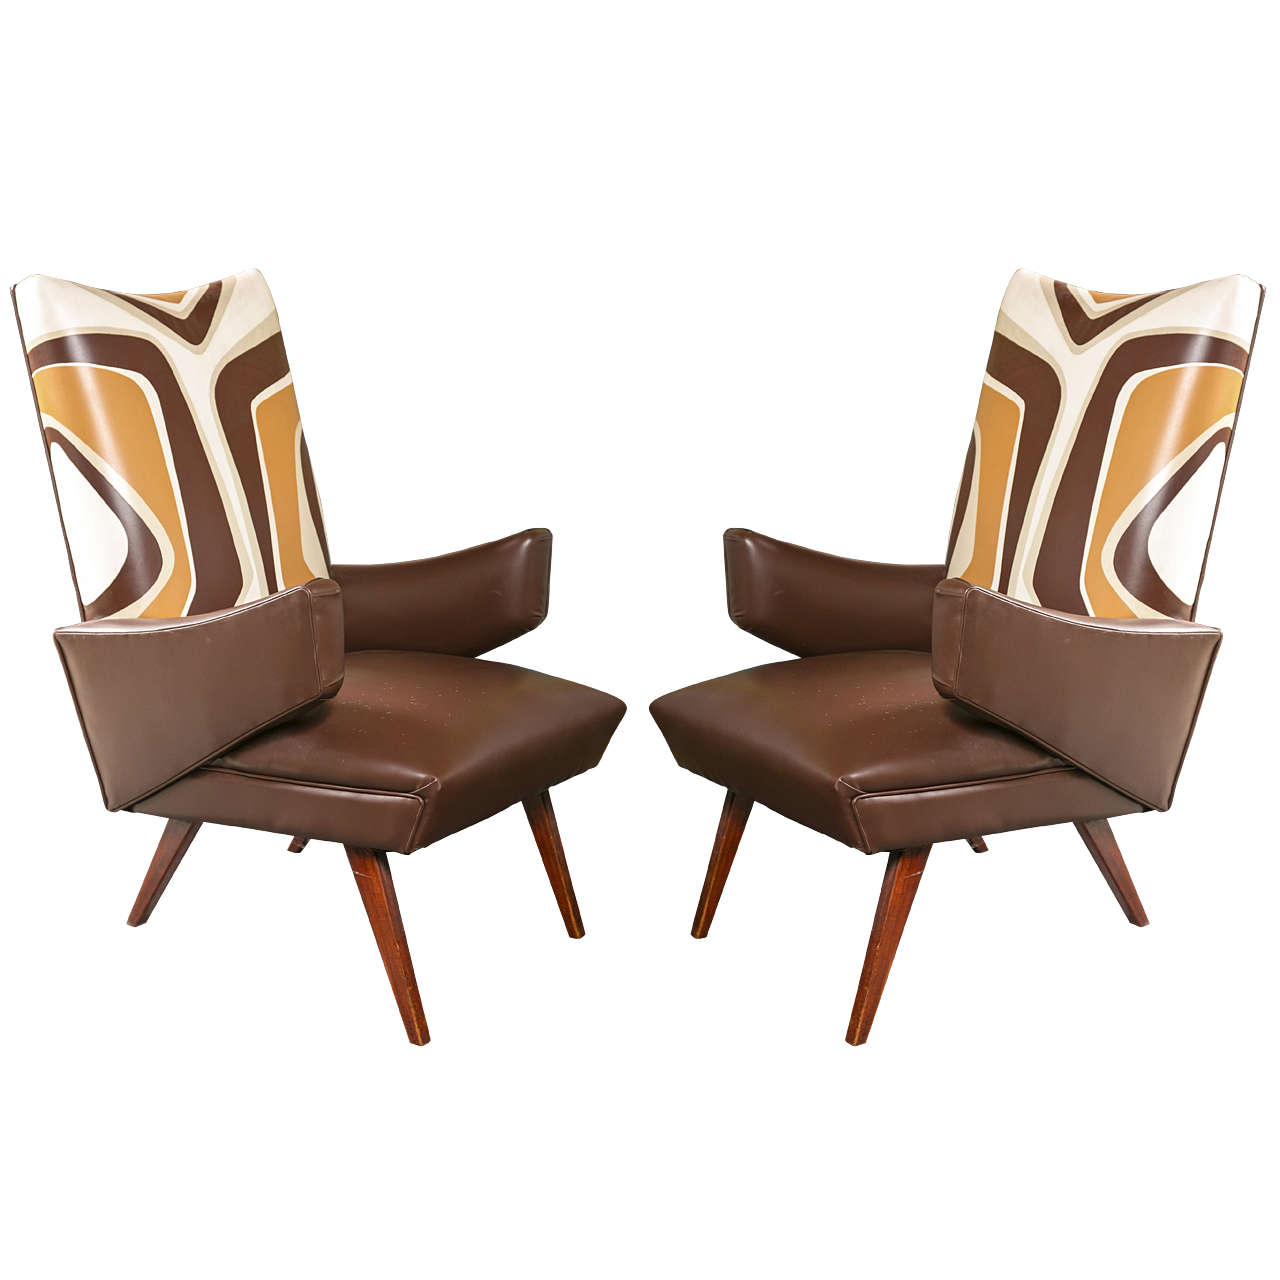 Pair of Mid-Century Leather Chairs